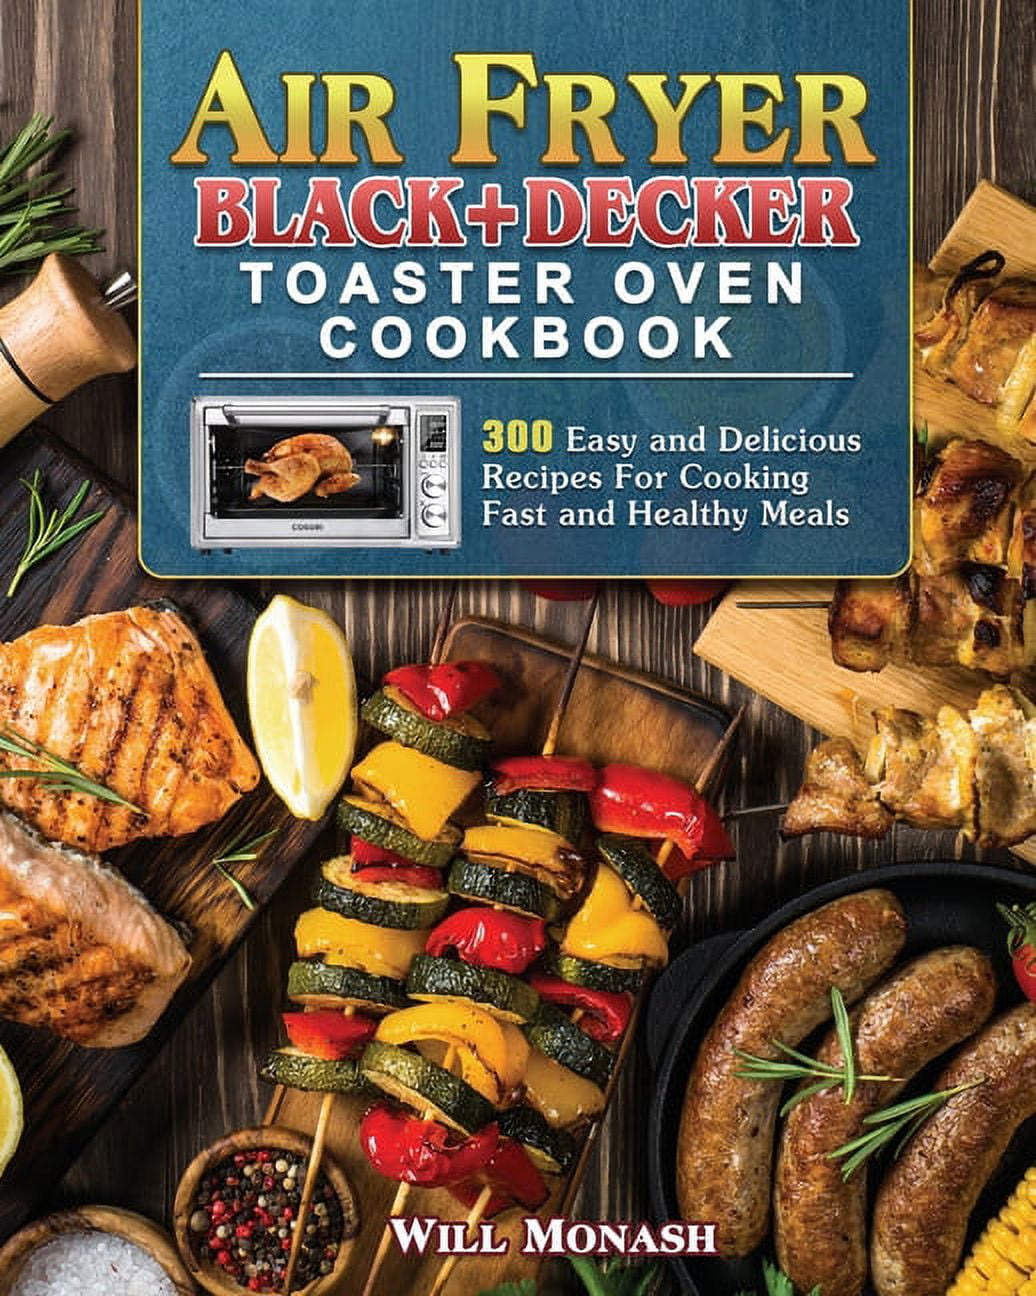 Black Decker Air Fry Toaster Oven cookbook: 800 Delicious and